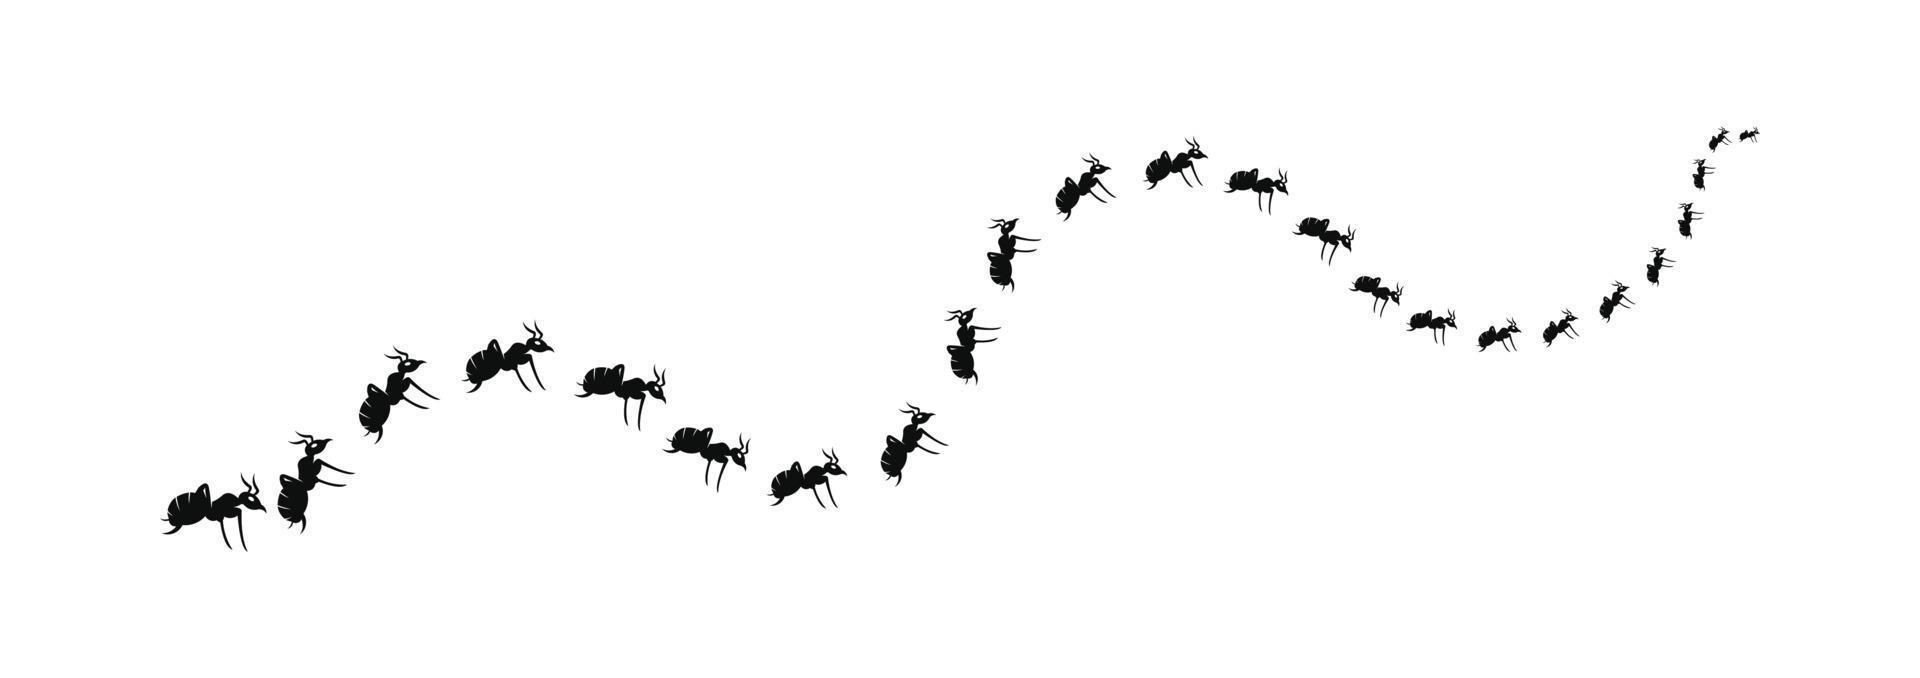 A line of worker ants marching in search of food.Worker ants marching in a line. ants road Vector illustration